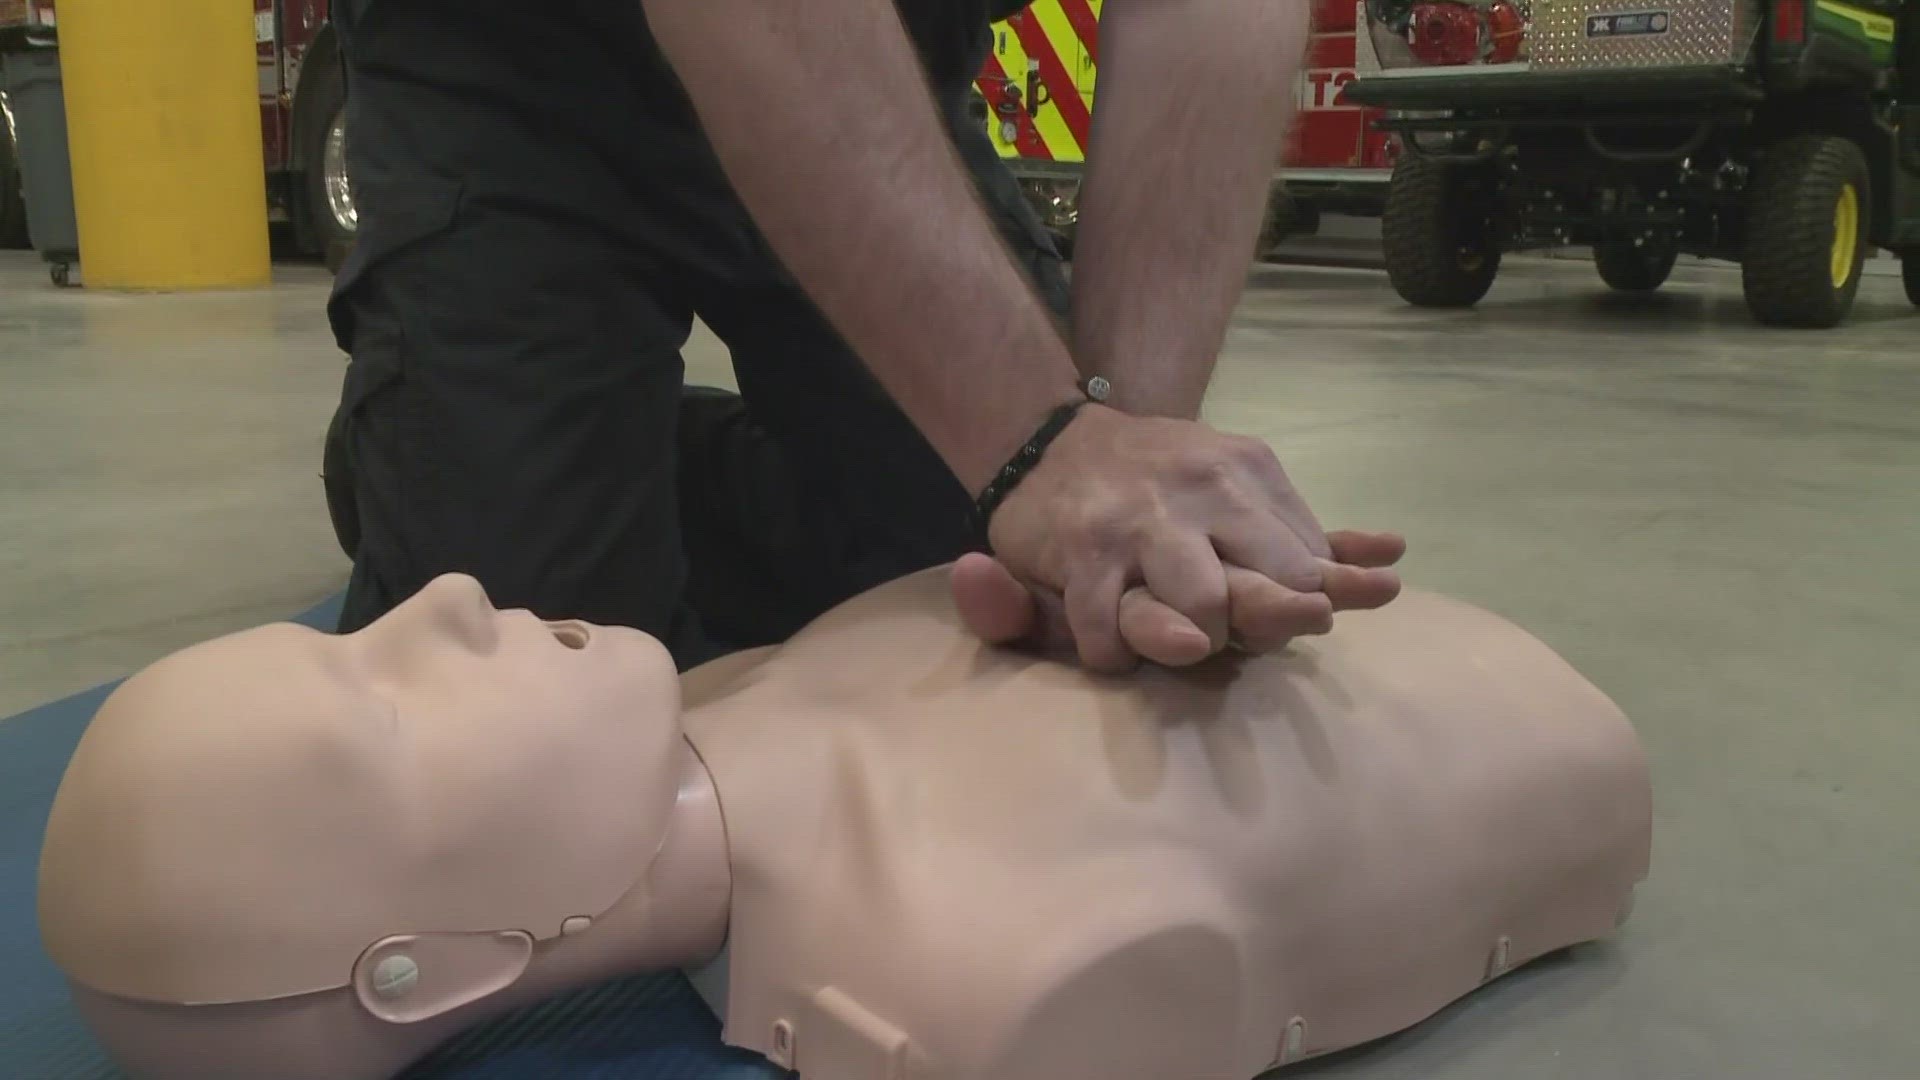 The South Portland Fire Department demonstrated how to perform life-saving hands-only CPR when someone is experiencing cardiac arrest.